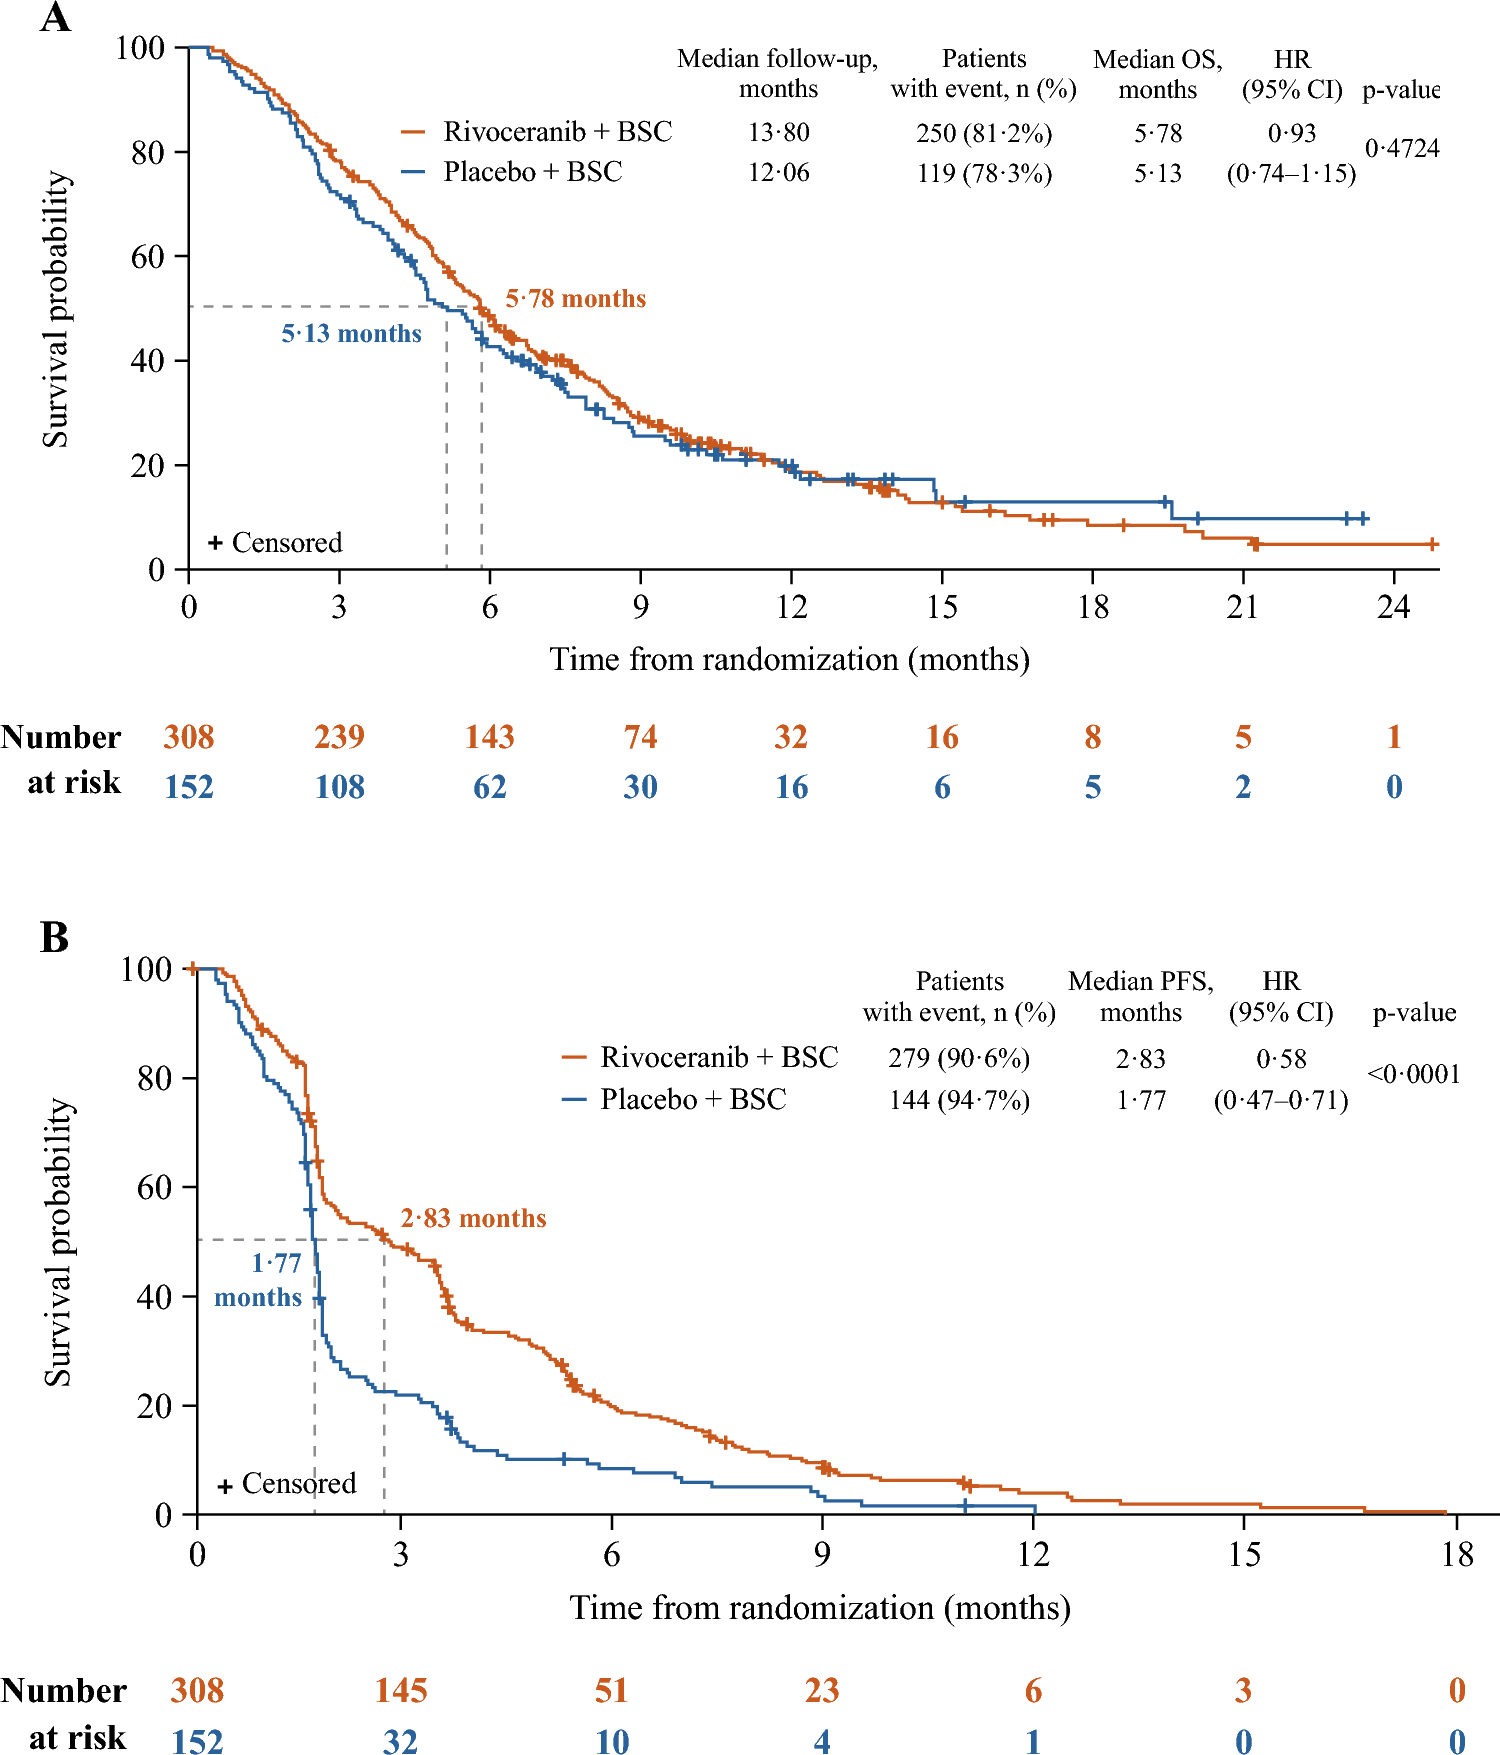 Rivoceranib, a VEGFR-2 inhibitor, monotherapy in previously treated patients with advanced or metastatic gastric or gastroesophageal junction cancer (ANGEL study): an international, randomized, placebo-controlled, phase 3 trial